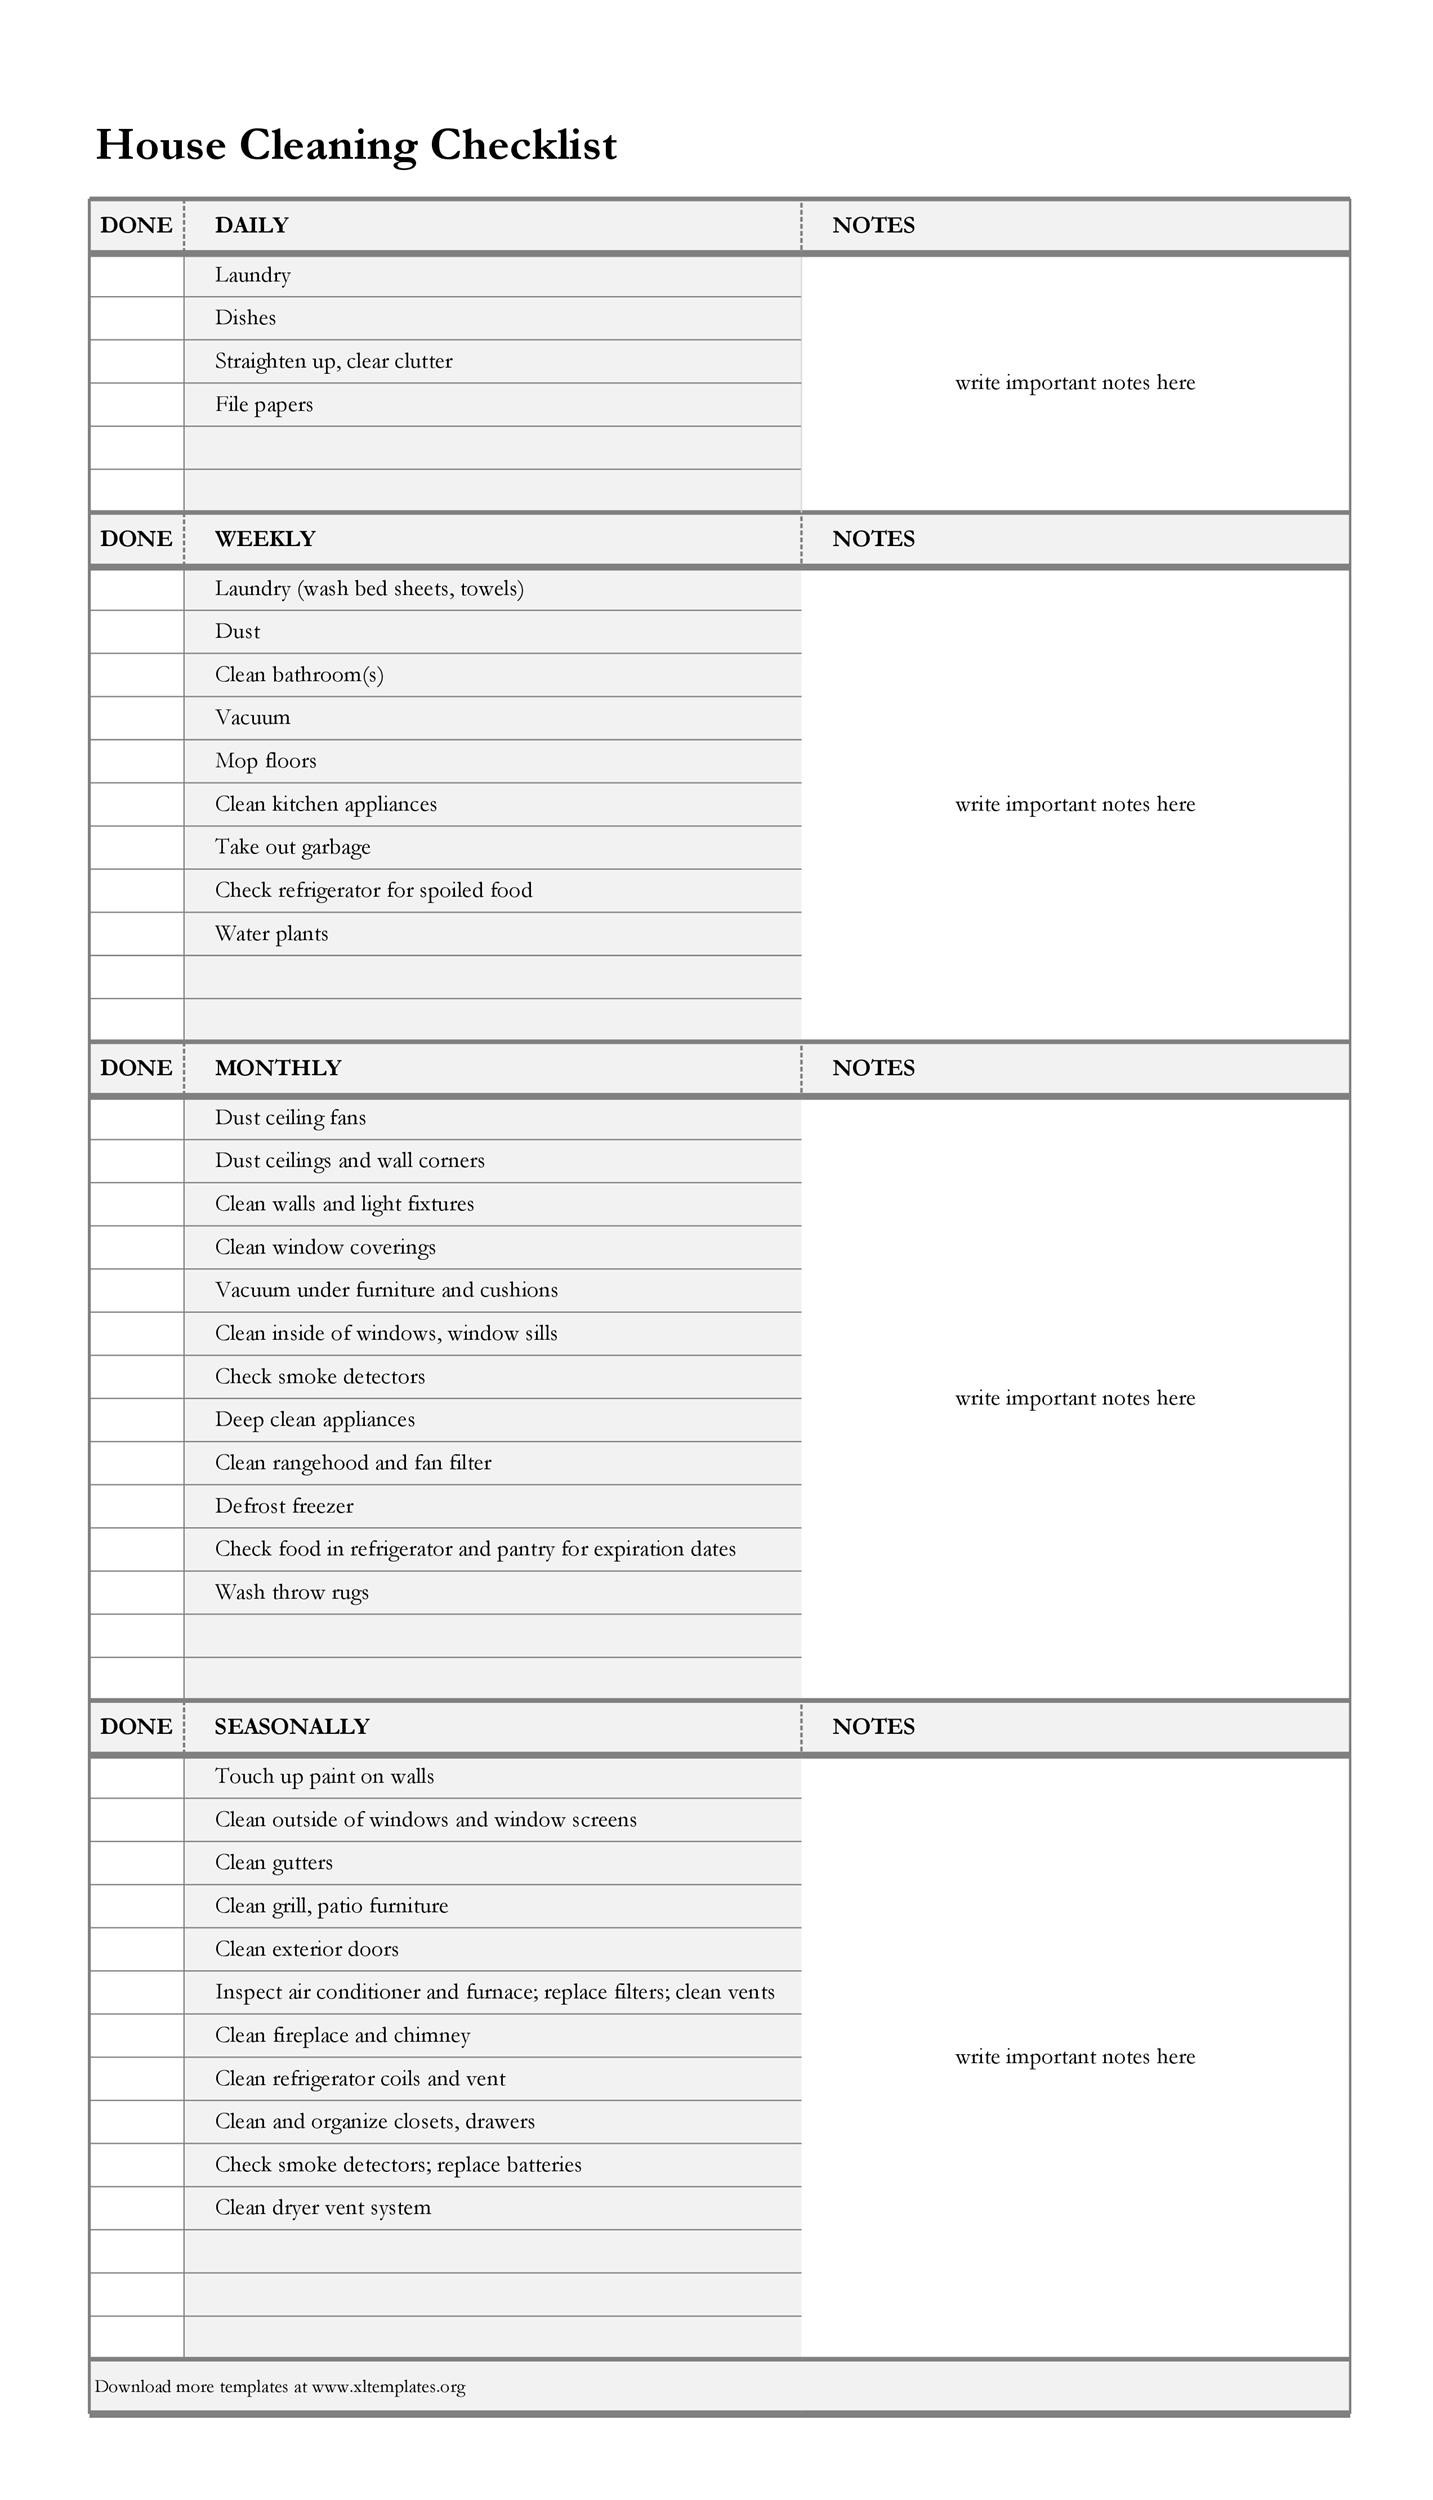 11 Printable House Cleaning Checklist Templates ᐅ TemplateLab For Deep Cleaning Checklist Template With Regard To Deep Cleaning Checklist Template